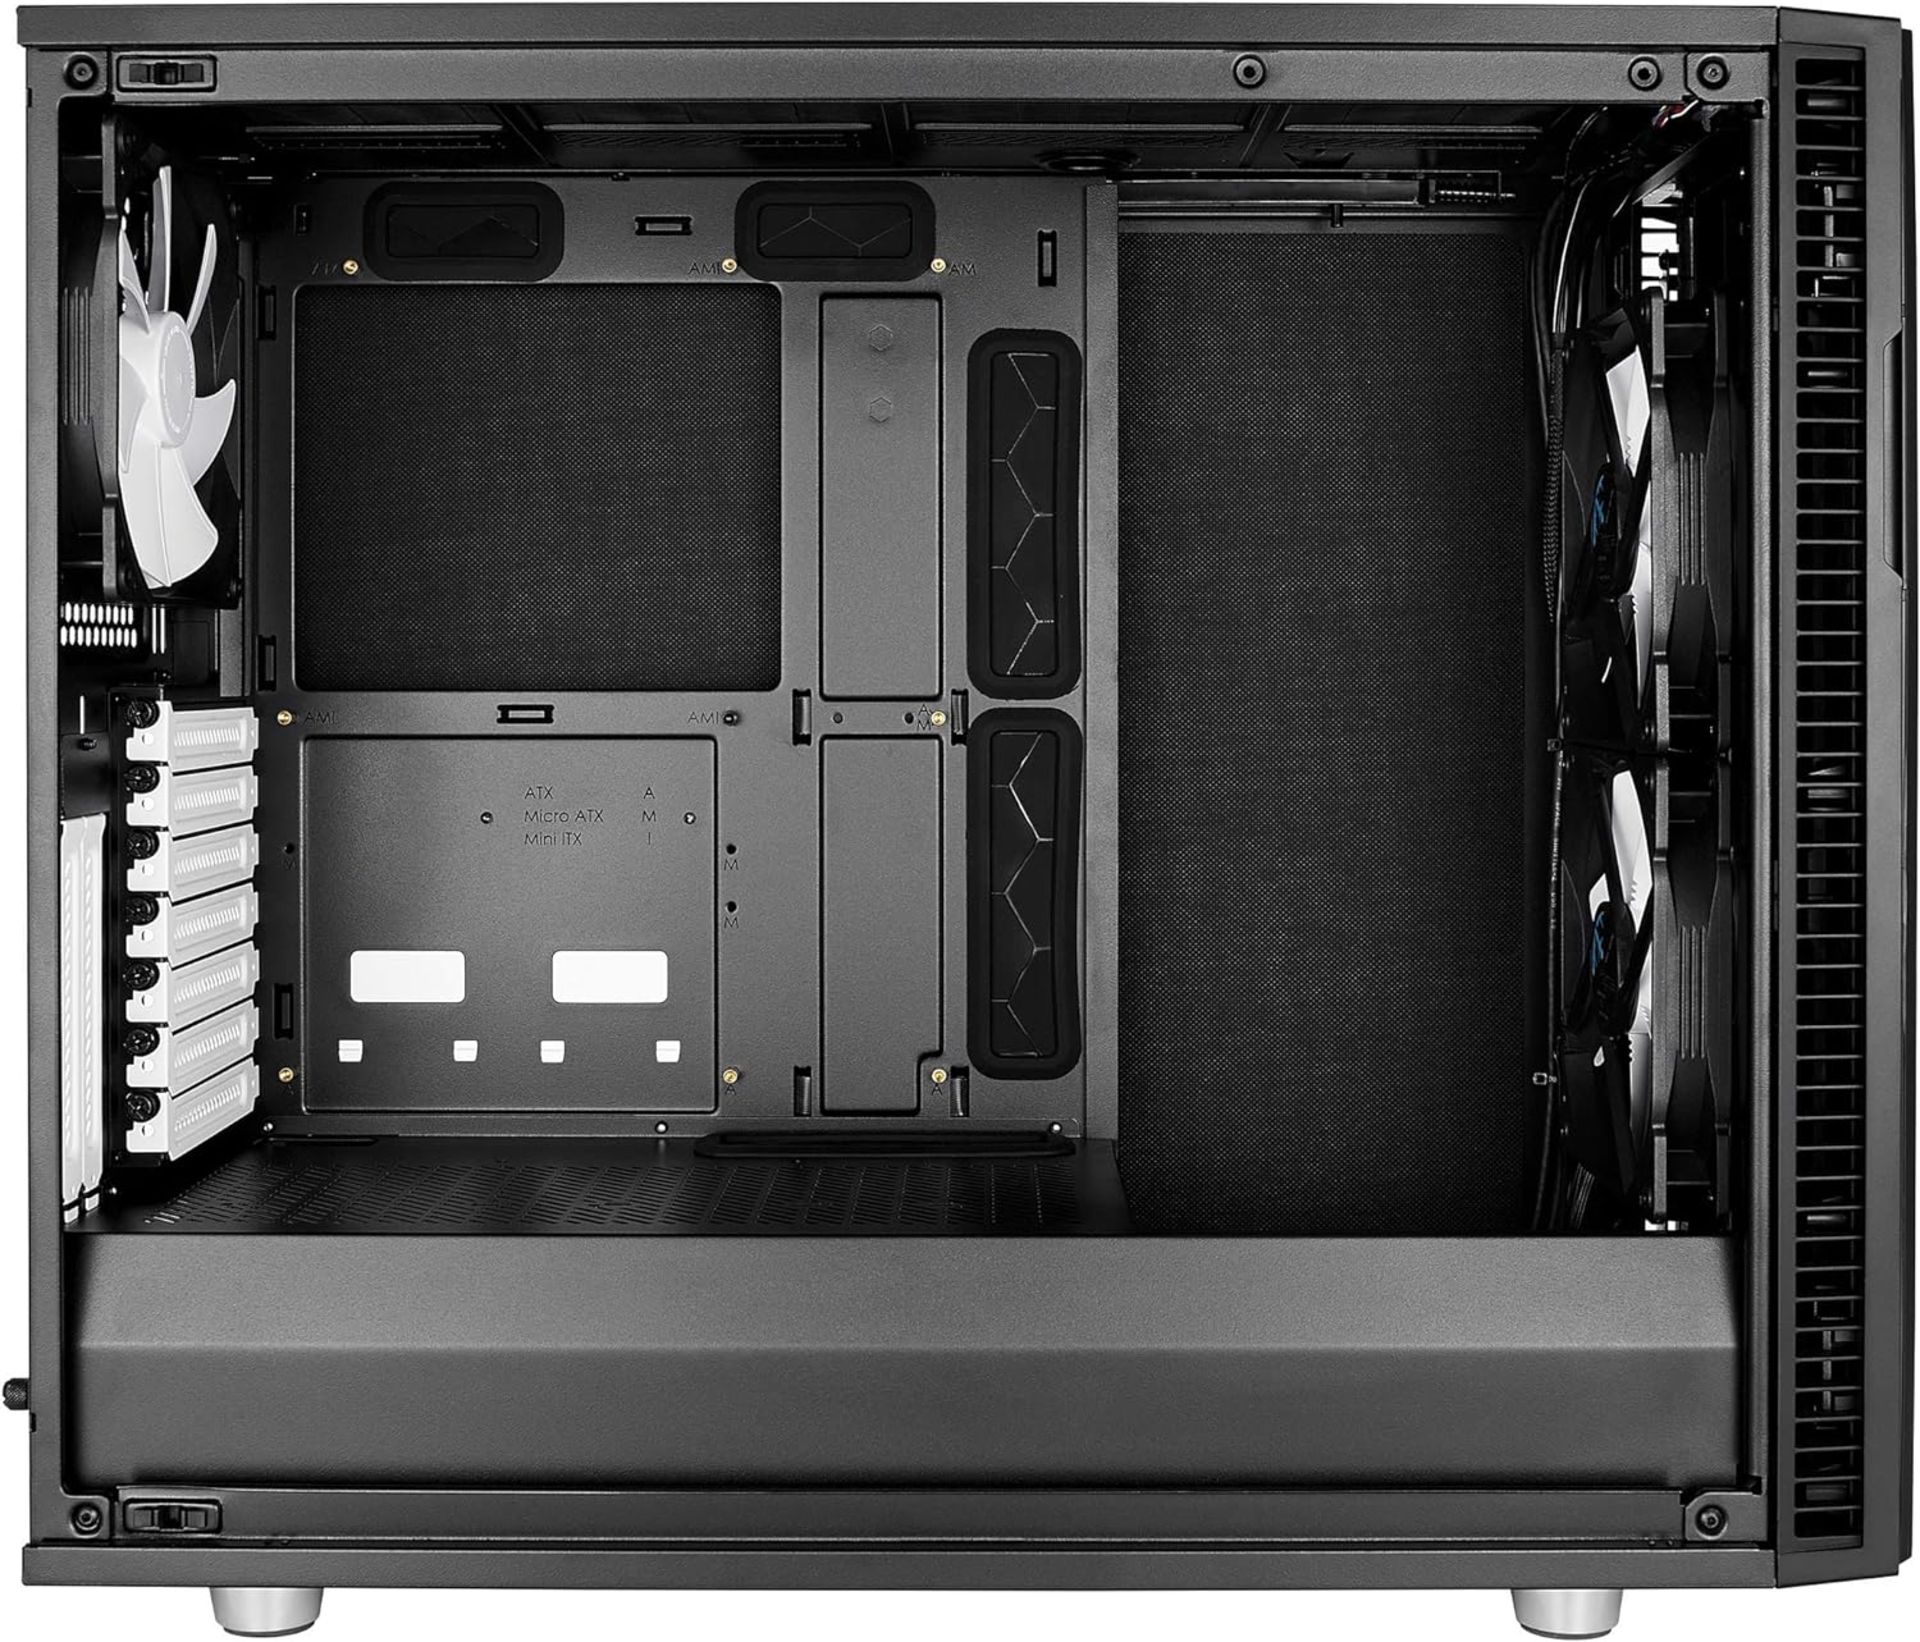 NEW & BOXED FRACTAL DESIGN Define R6 Mid Tower ATX Computer Case- BLACK. RRP £161.94. (R6-7). - Image 6 of 8